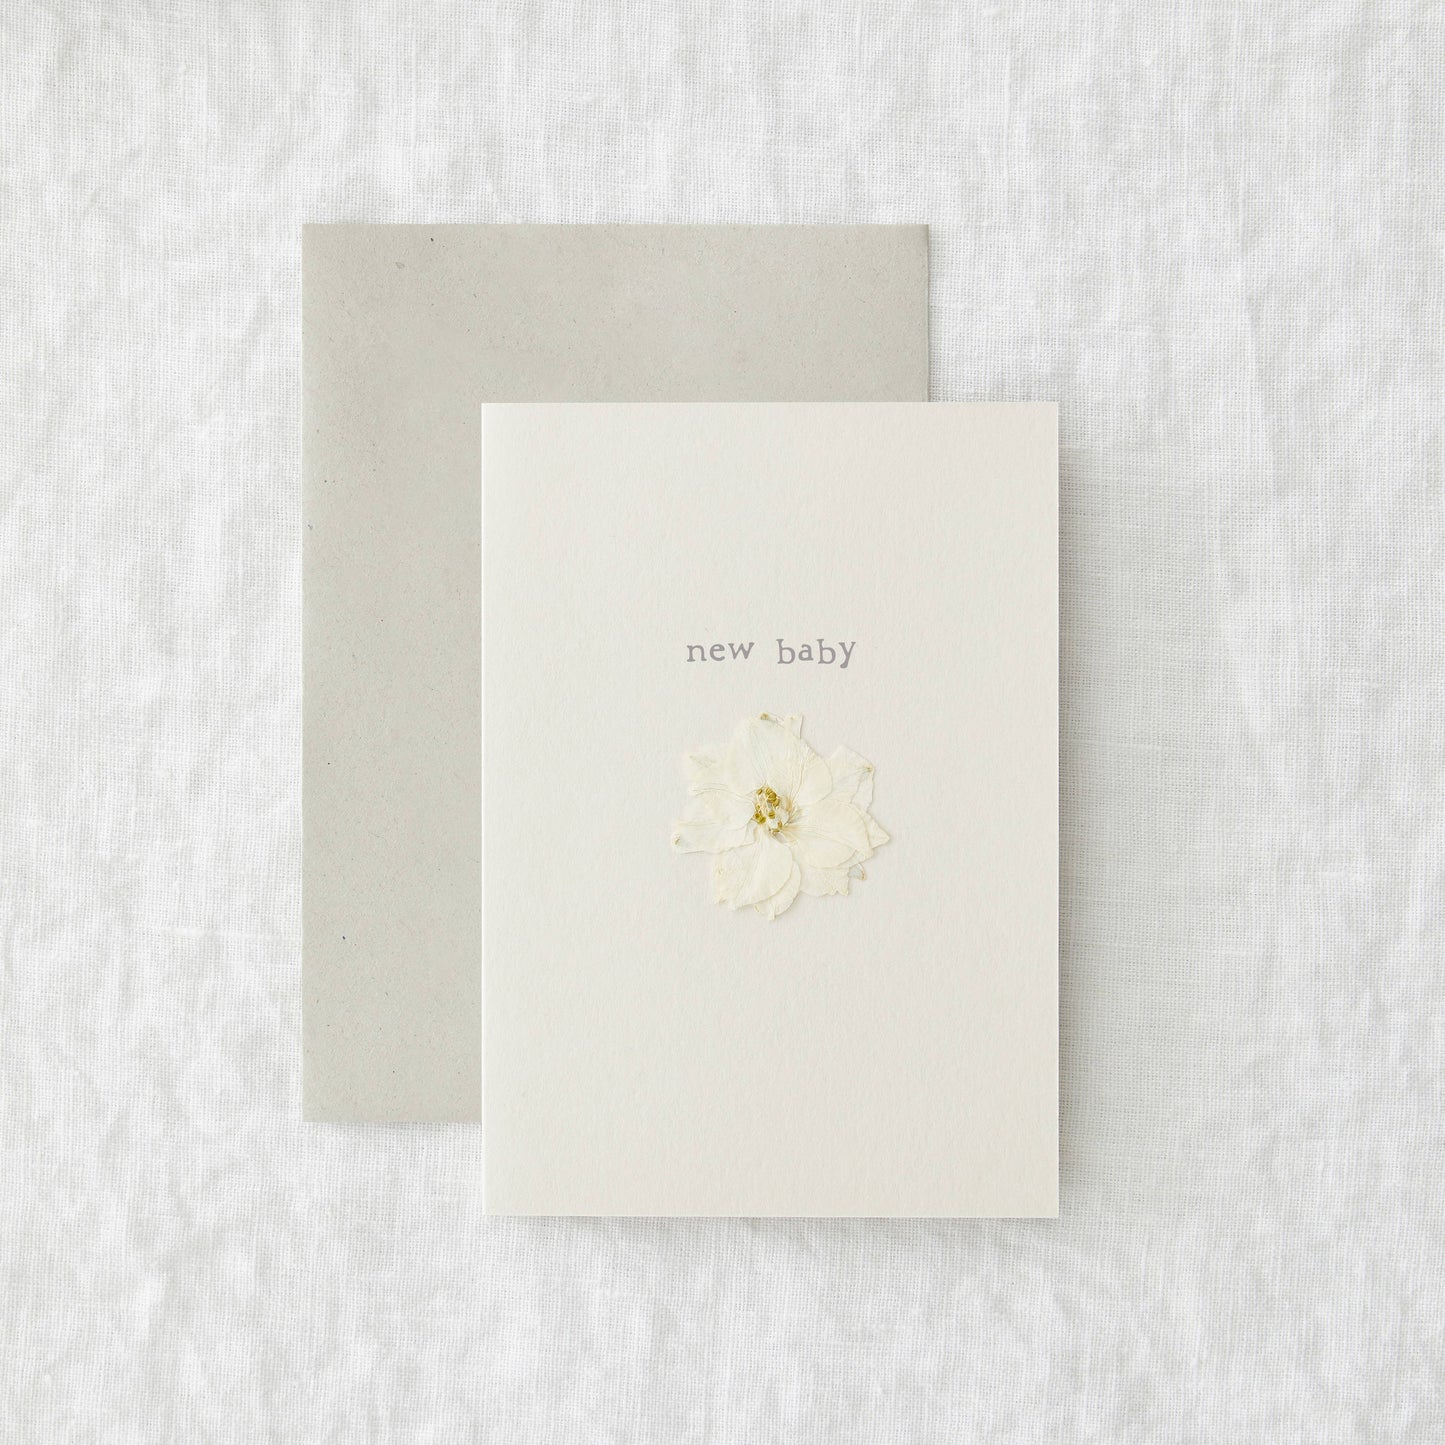 New Baby Dried Pressed Flower Card